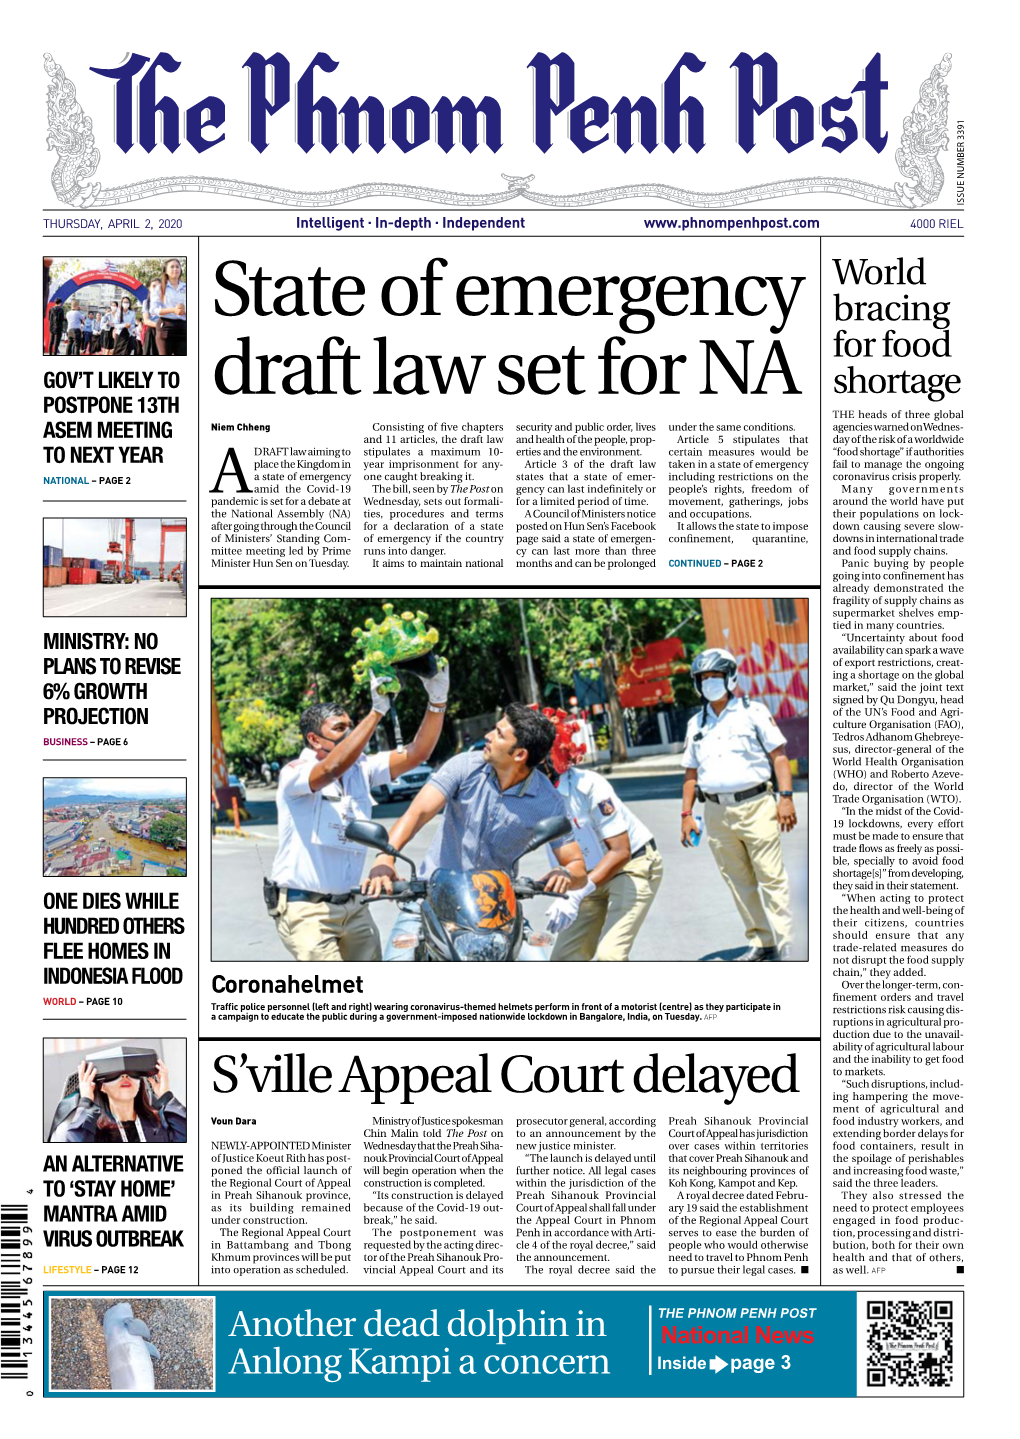 State of Emergency Draft Law Set for NA